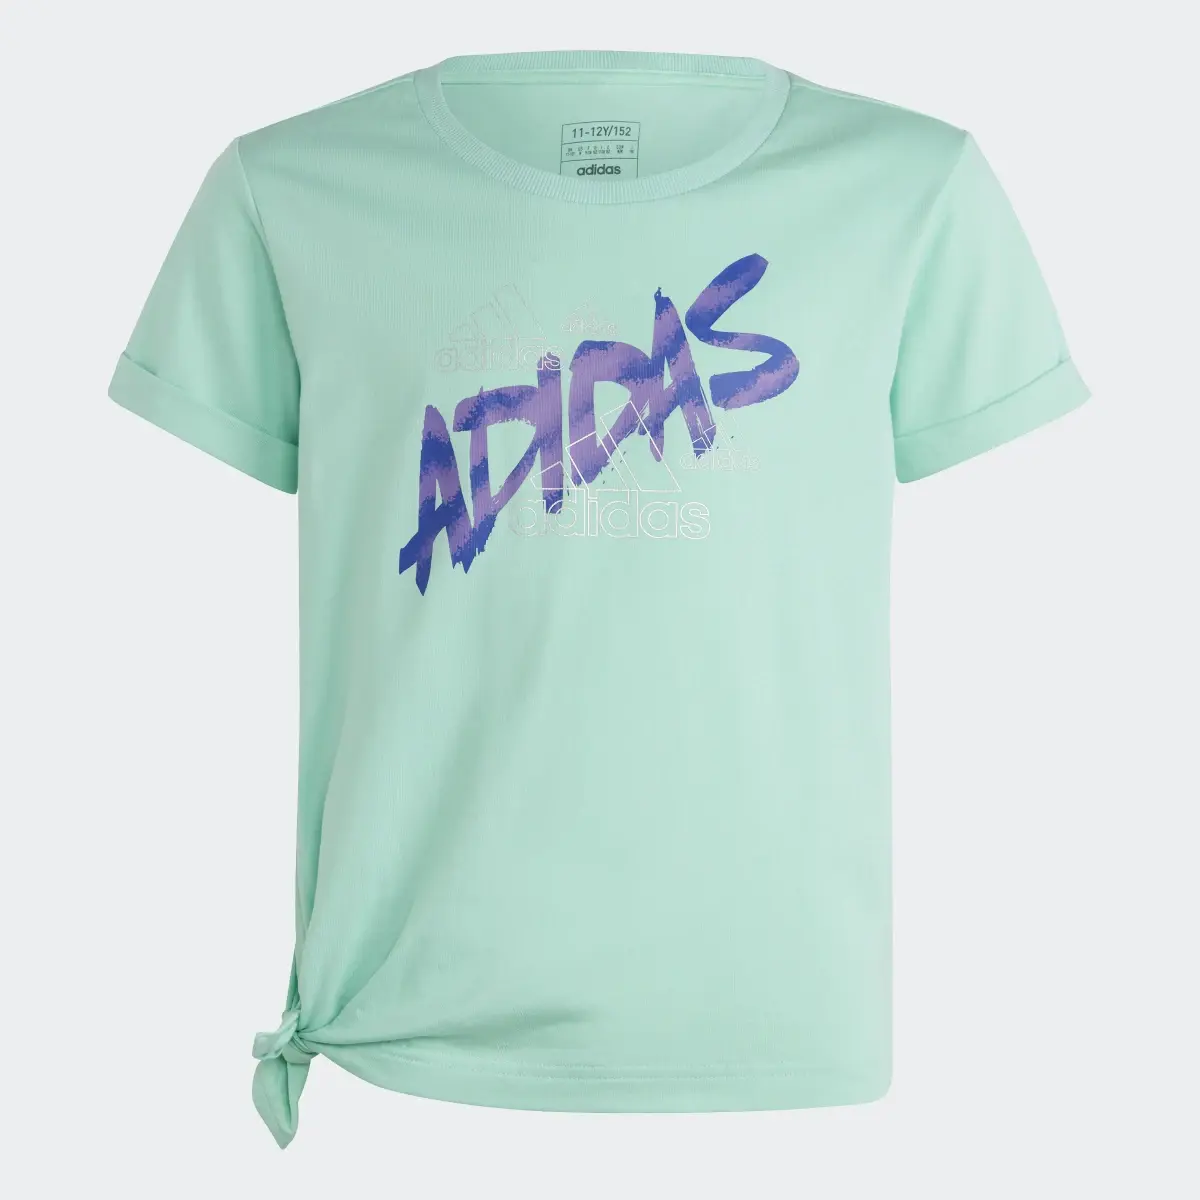 Adidas Dance Knotted T-Shirt. 1